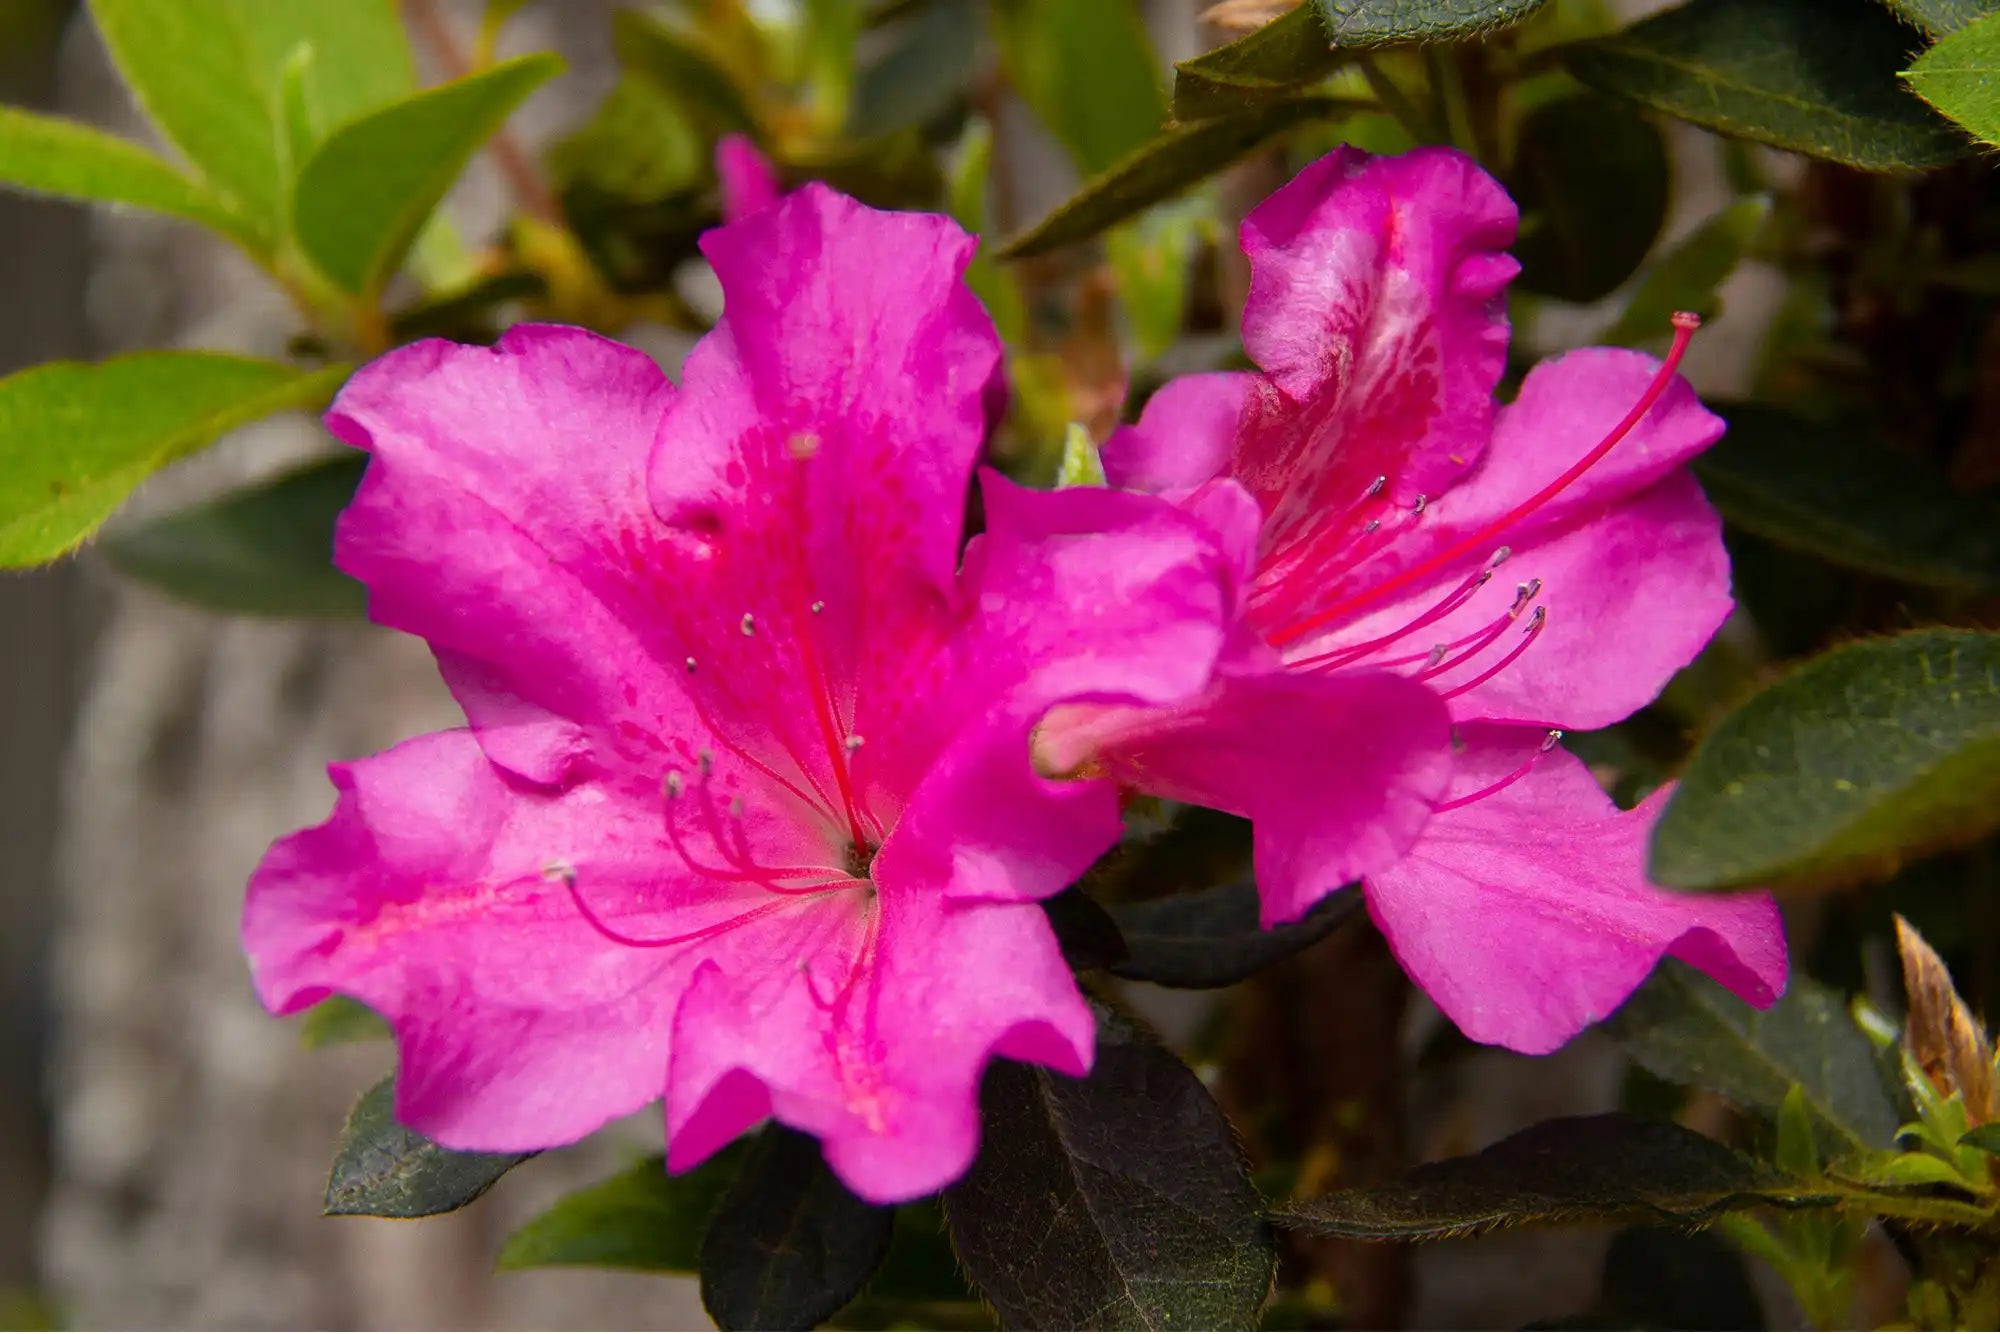 Closeup of the Augusta Echo® Azalea shows of the beauty of its trumpet shaped, fuchsia pink flowers with ornamental speckling inside. Its complimentary evergreen foliage in the background  surrounds the vibrant blooms.